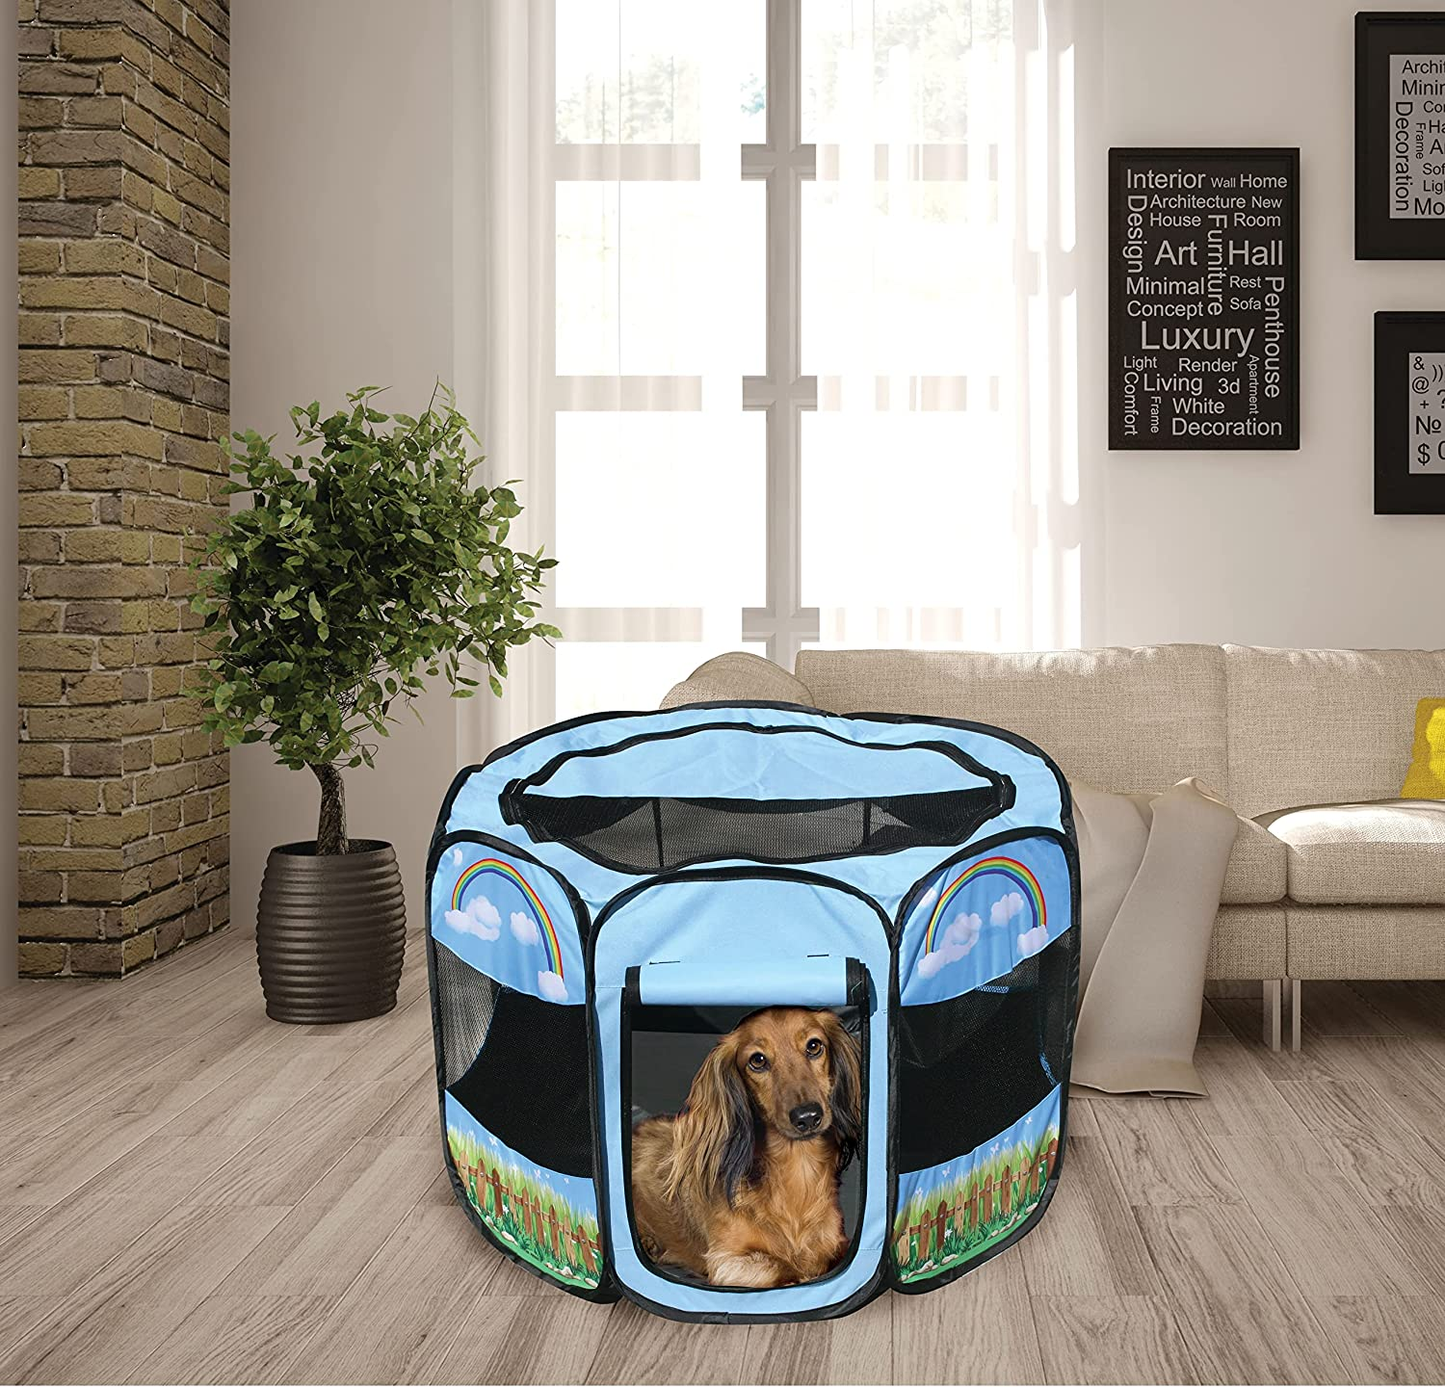 Pet Portable Foldable Play Pen Exercise Kennel Dogs Cats Indoor/Outdoor Tent for Small Medium Large Pets Animal Playpen with Pop up Mesh Cover Great for Travel by